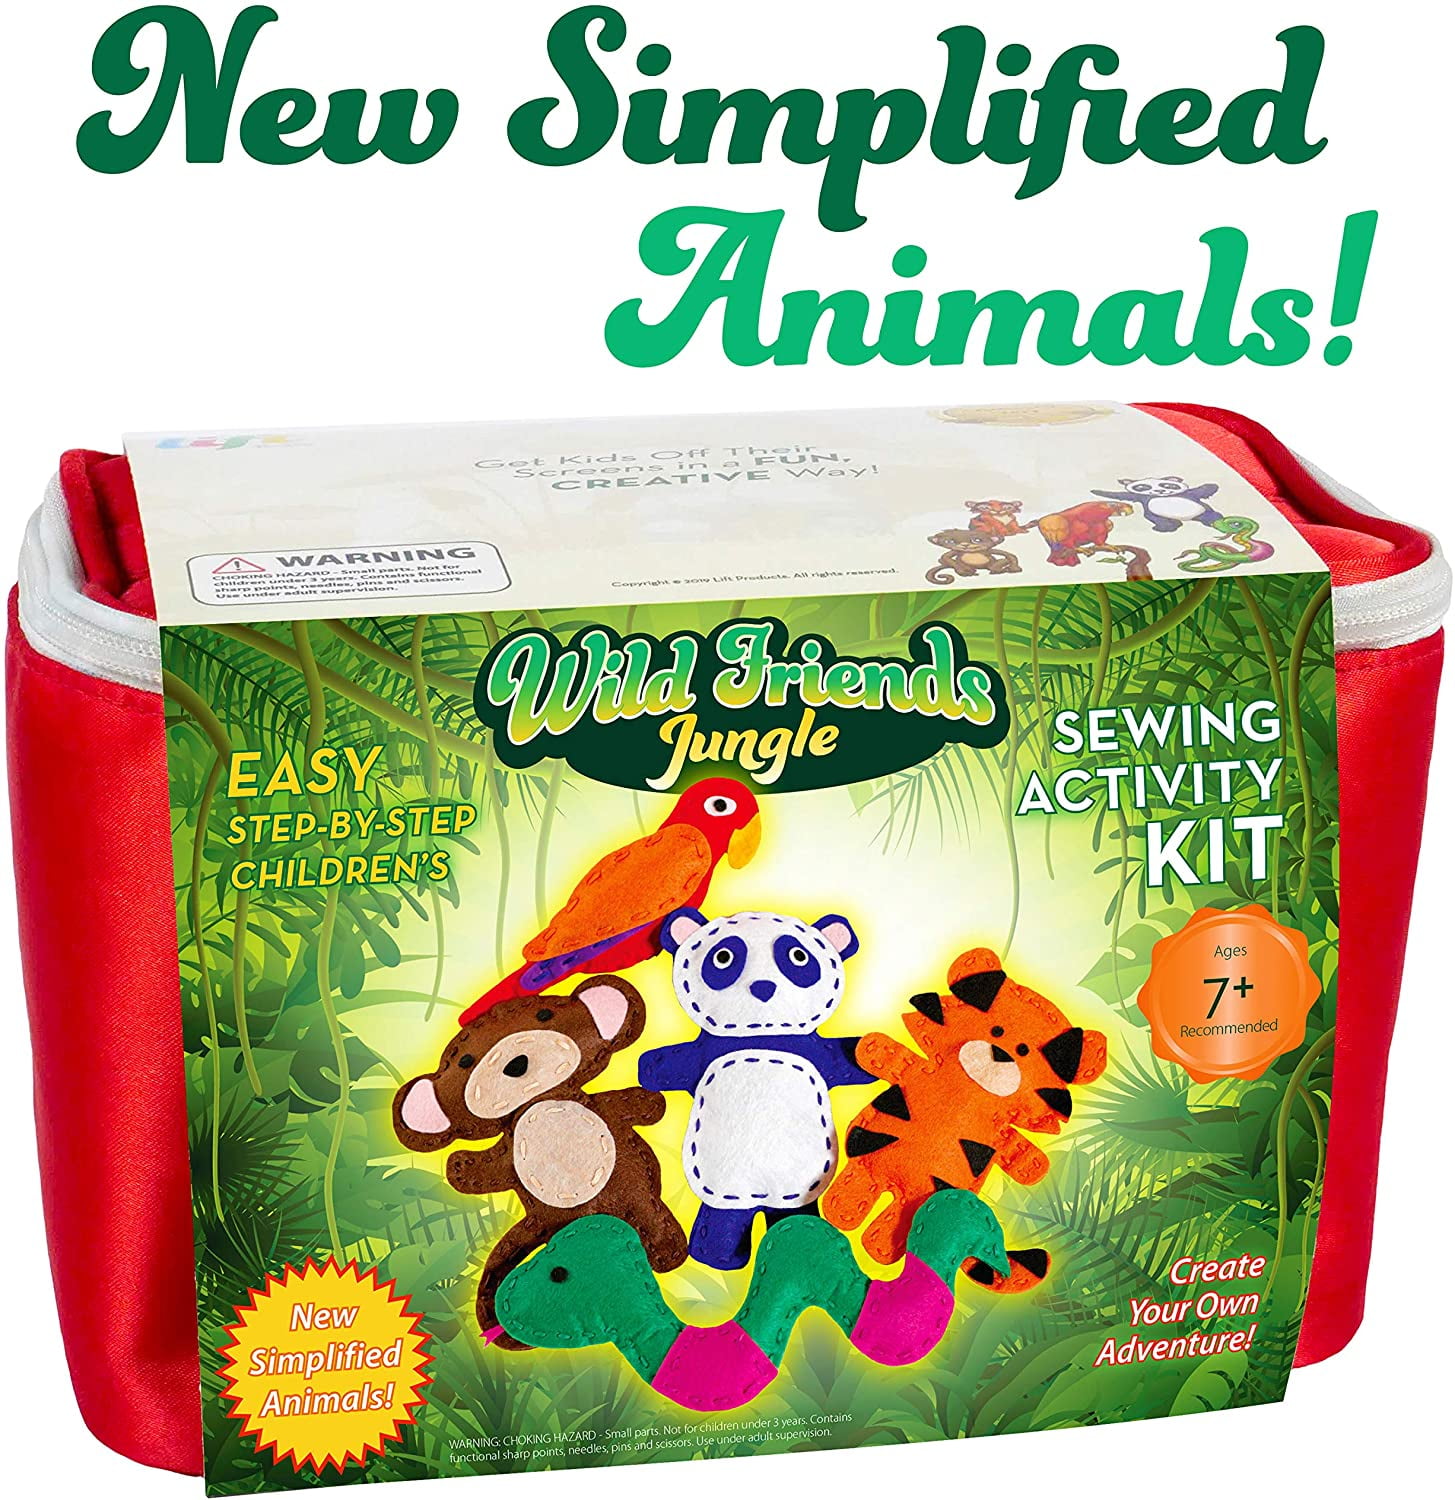 Bryte Jungle Animals Sewing Kit for Kids: A Fun DIY Arts & Crafts  Experience with 5 Pre-Cut Felt Animals, Needles, Thread, Instructions &  More - For Kids Age 7+ - Great Gift